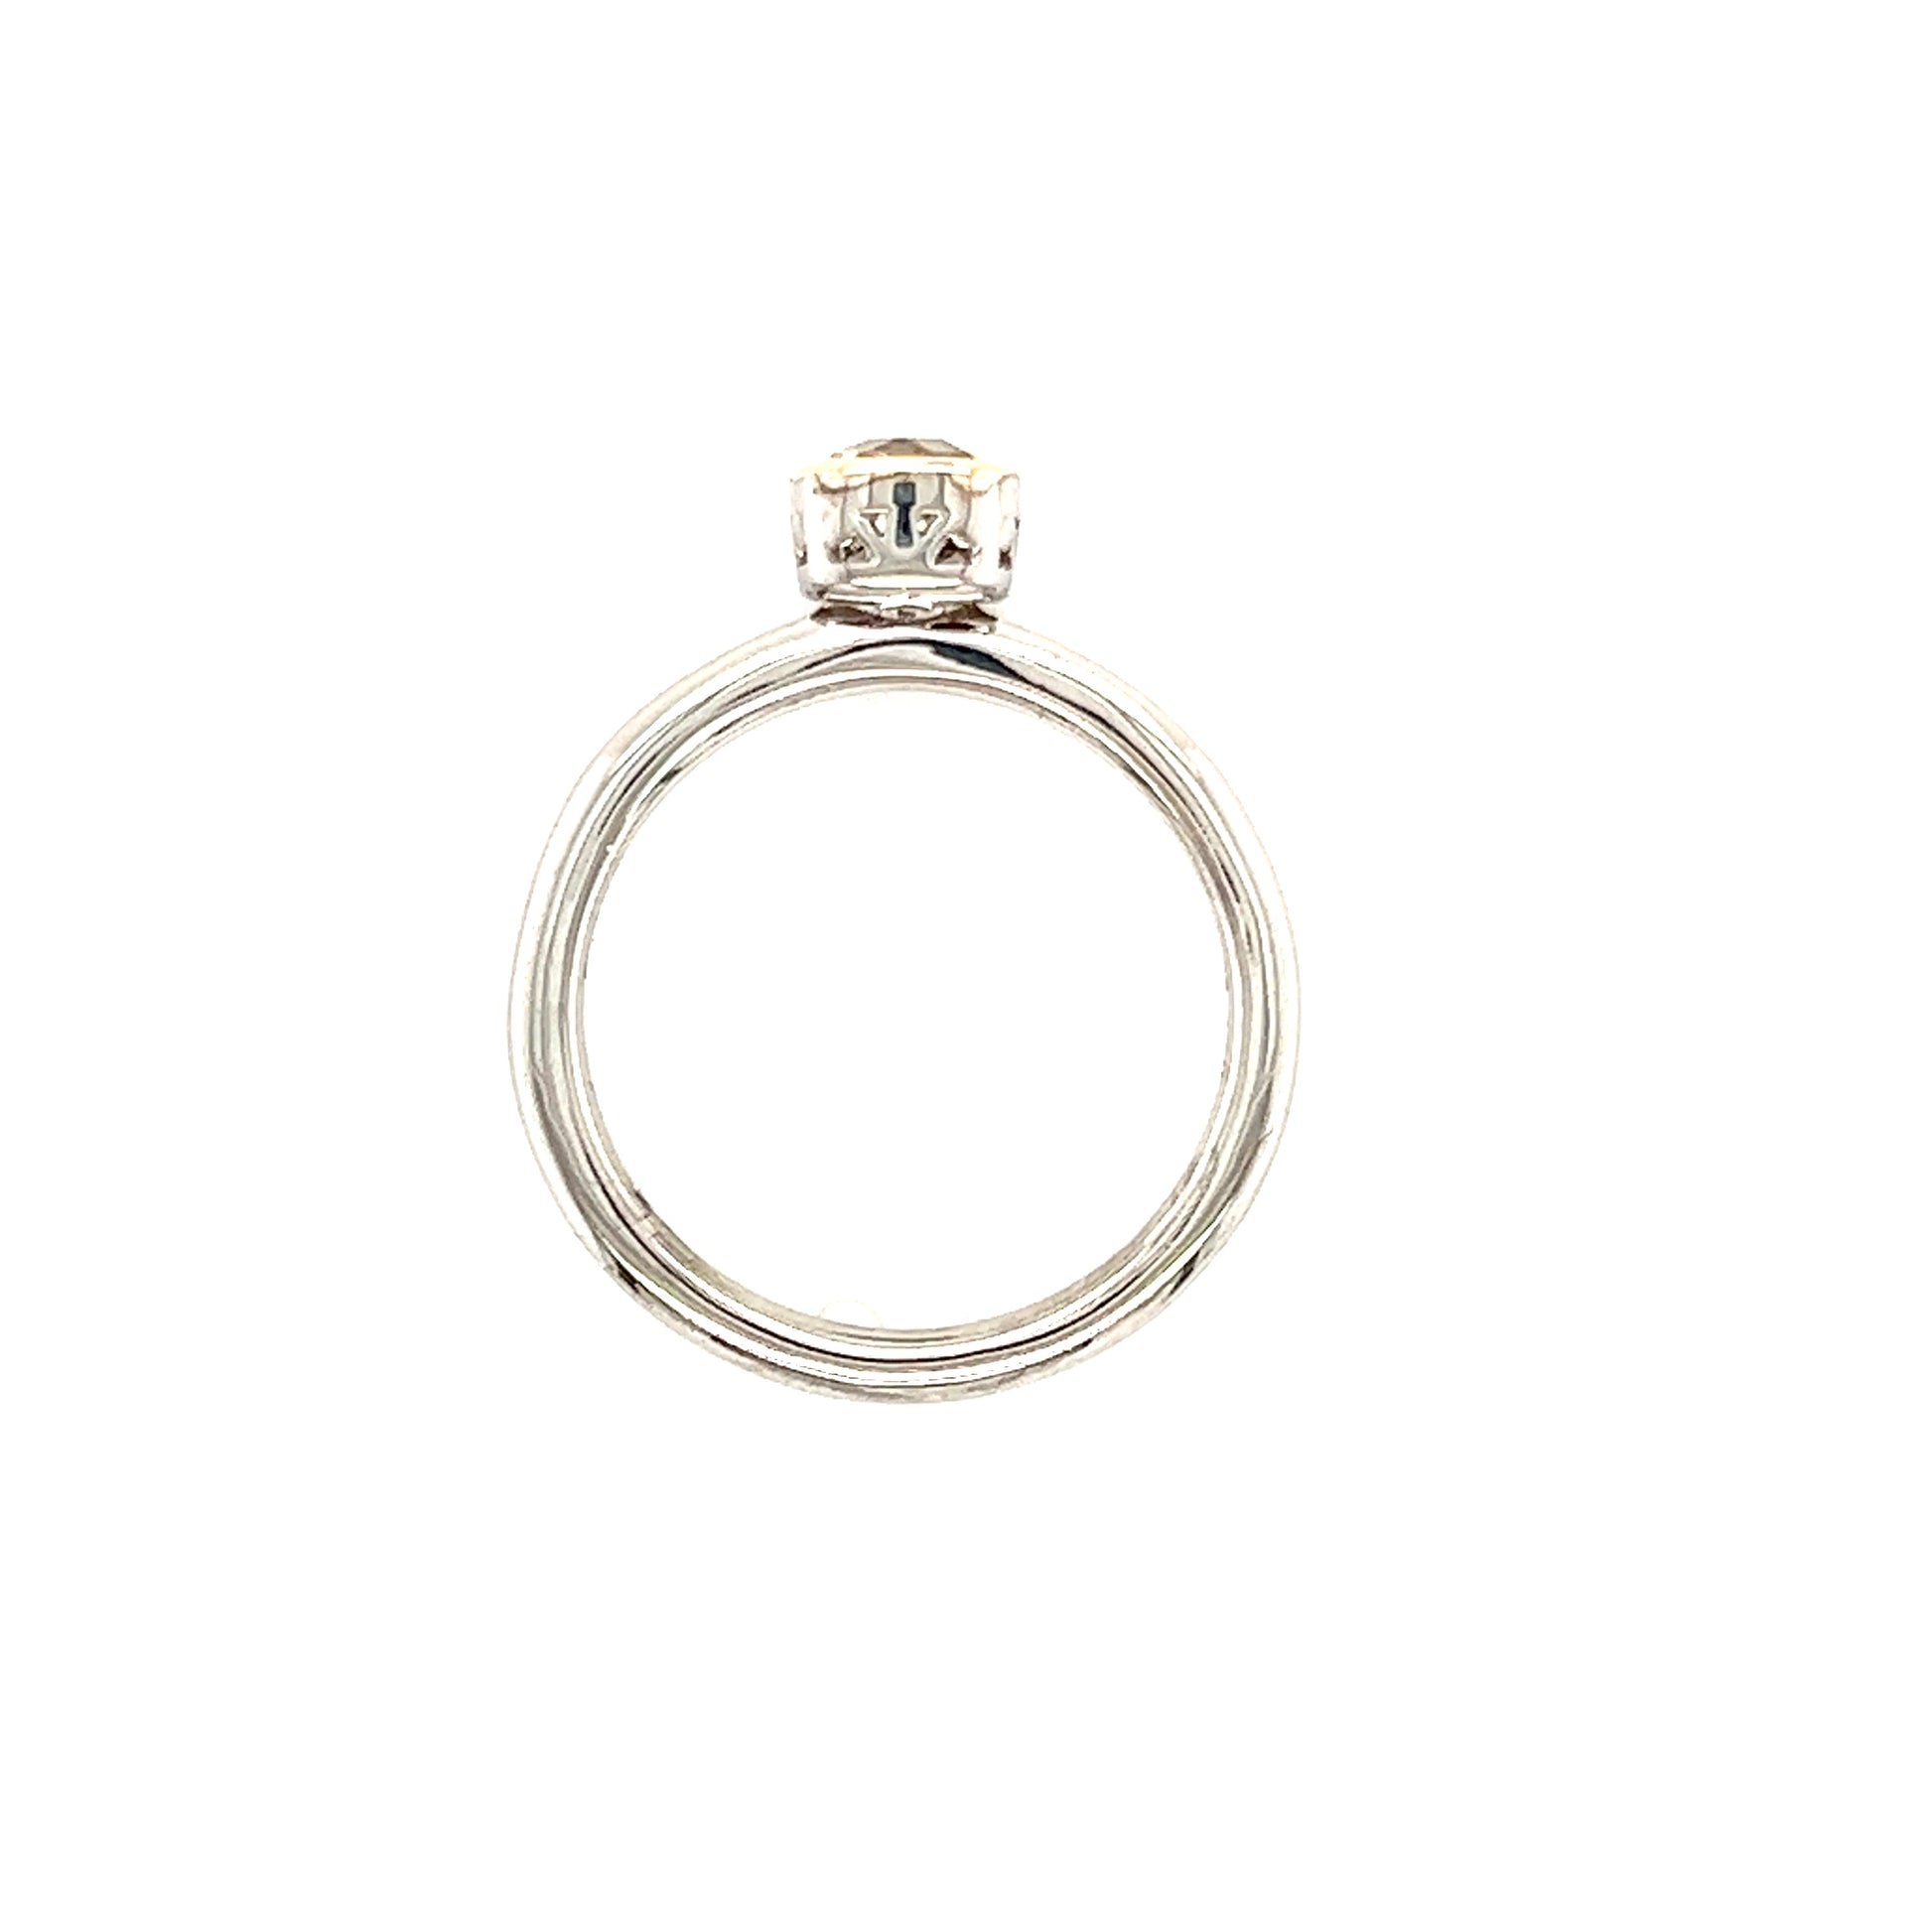 Cushion White Topaz Ring in Sterling Silver with 14K Yellow Gold Accent Top View 